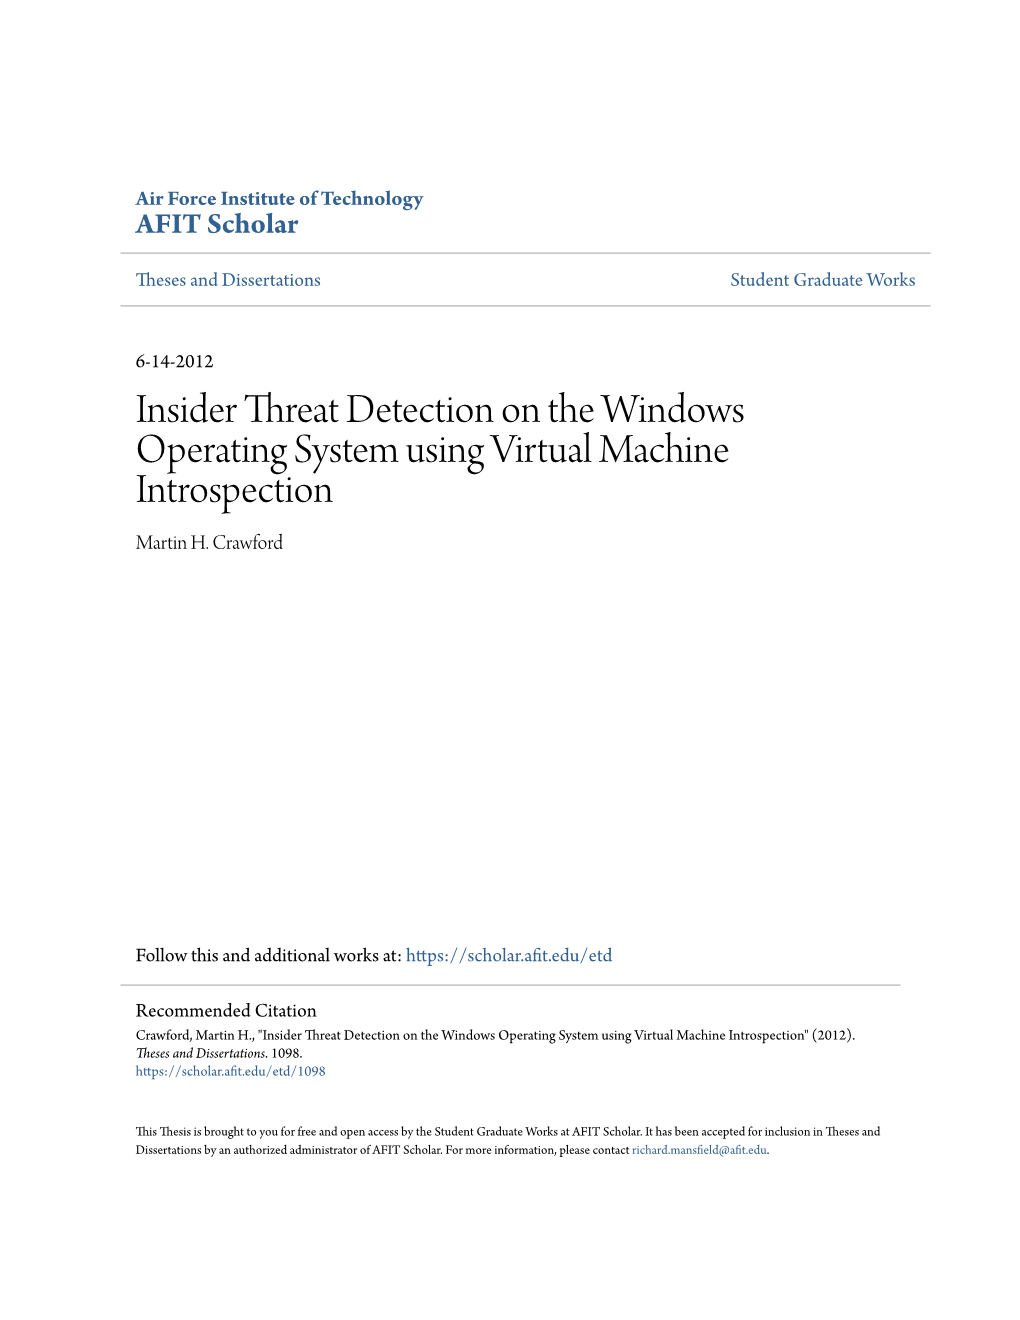 Insider Threat Detection on the Windows Operating System Using Virtual Machine Introspection Martin H